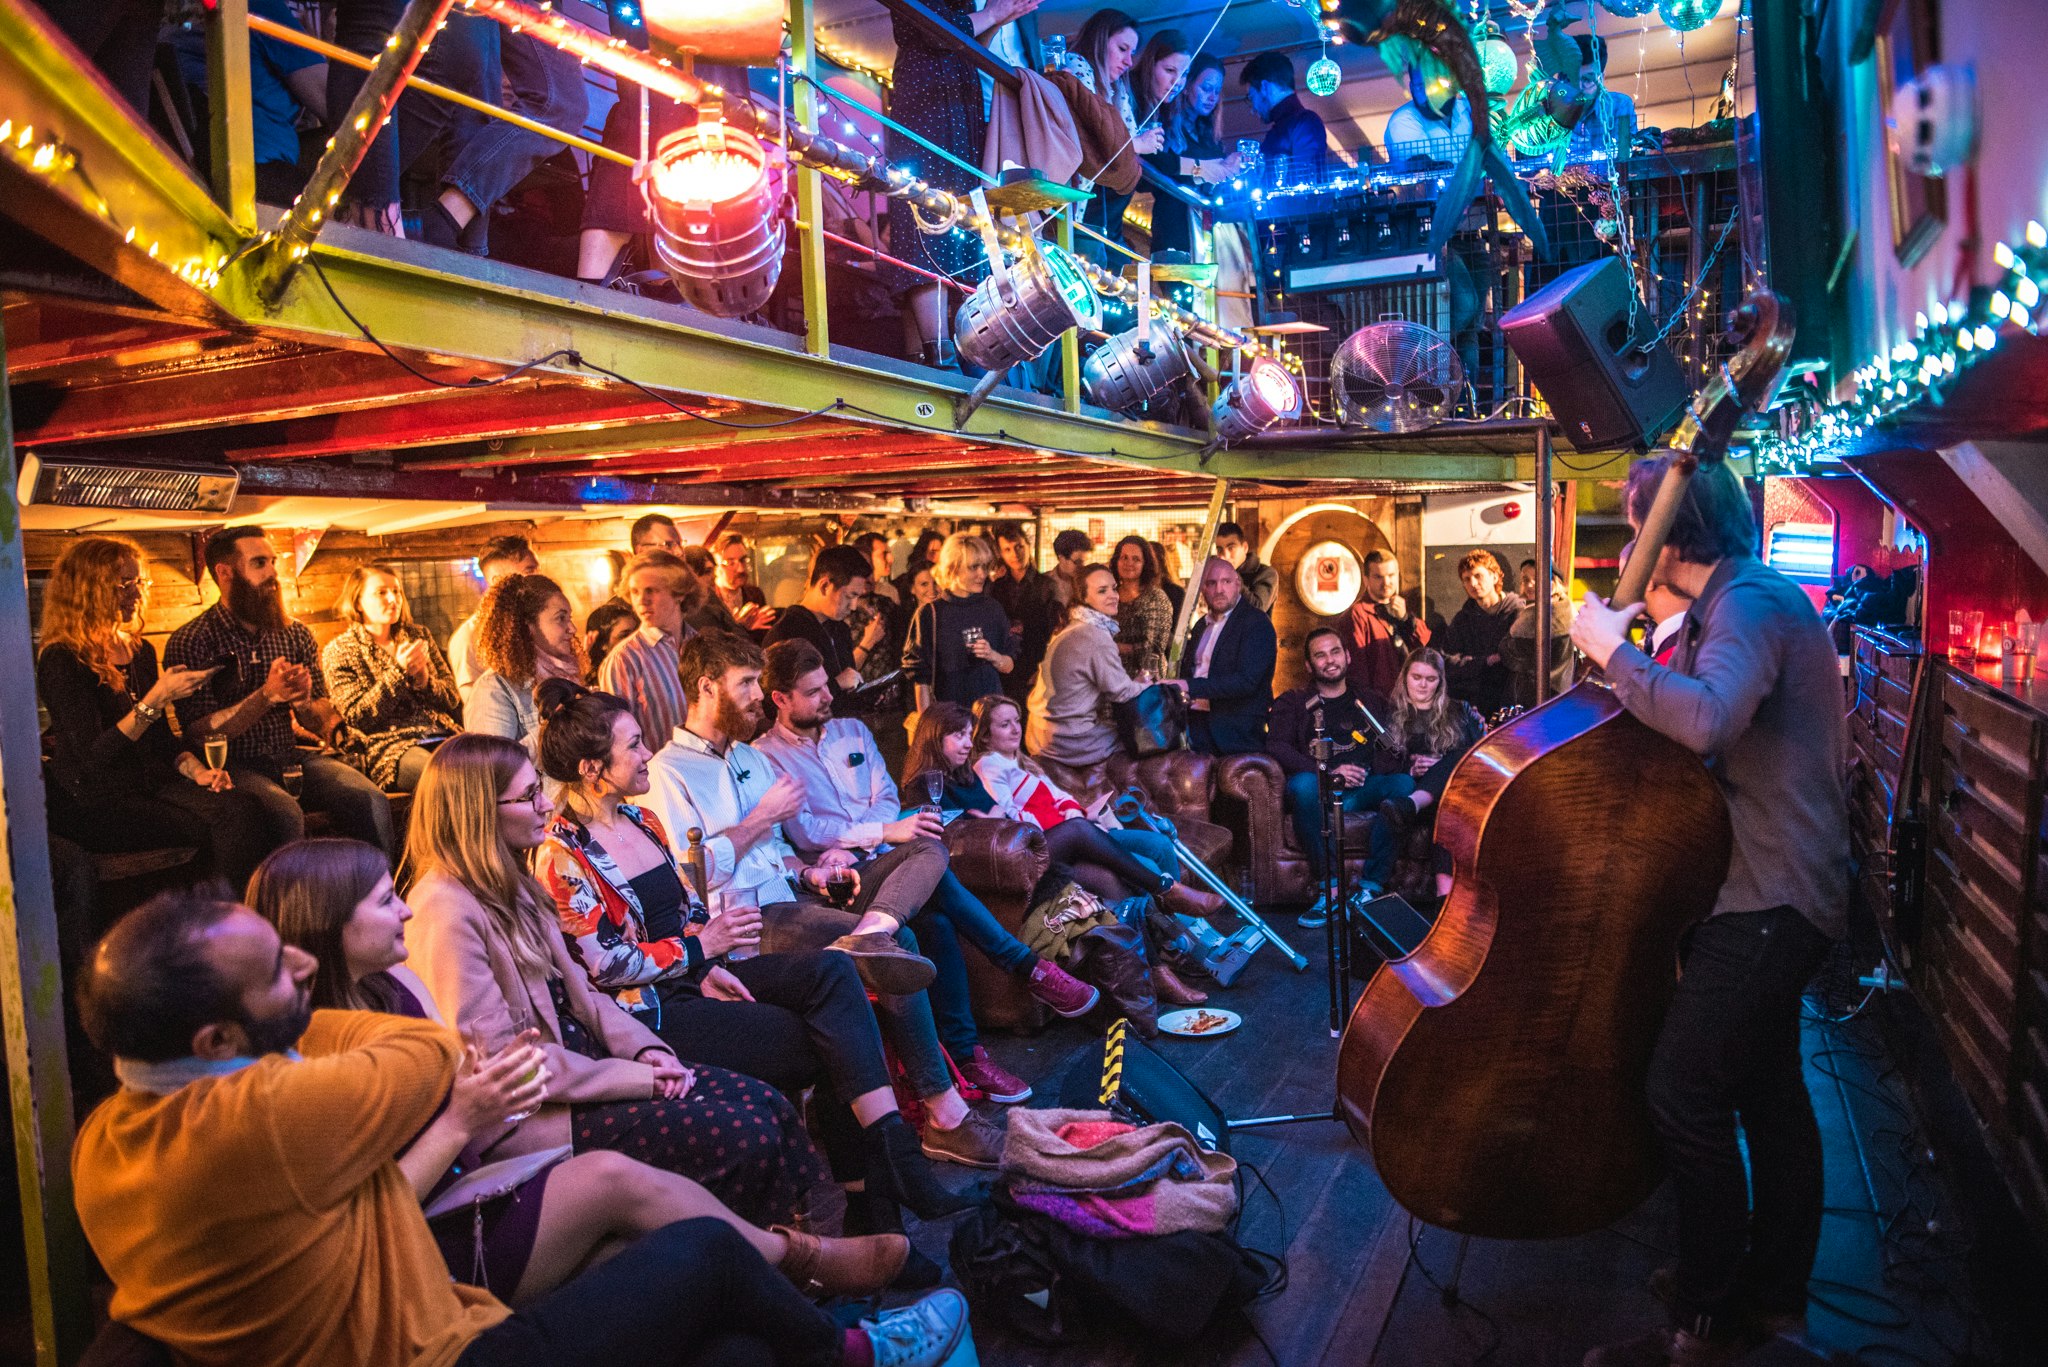 Inside the Tamesis barge, an intimate gig is in progress; the double-bass player in the foreground is obscuring the rest of the band.